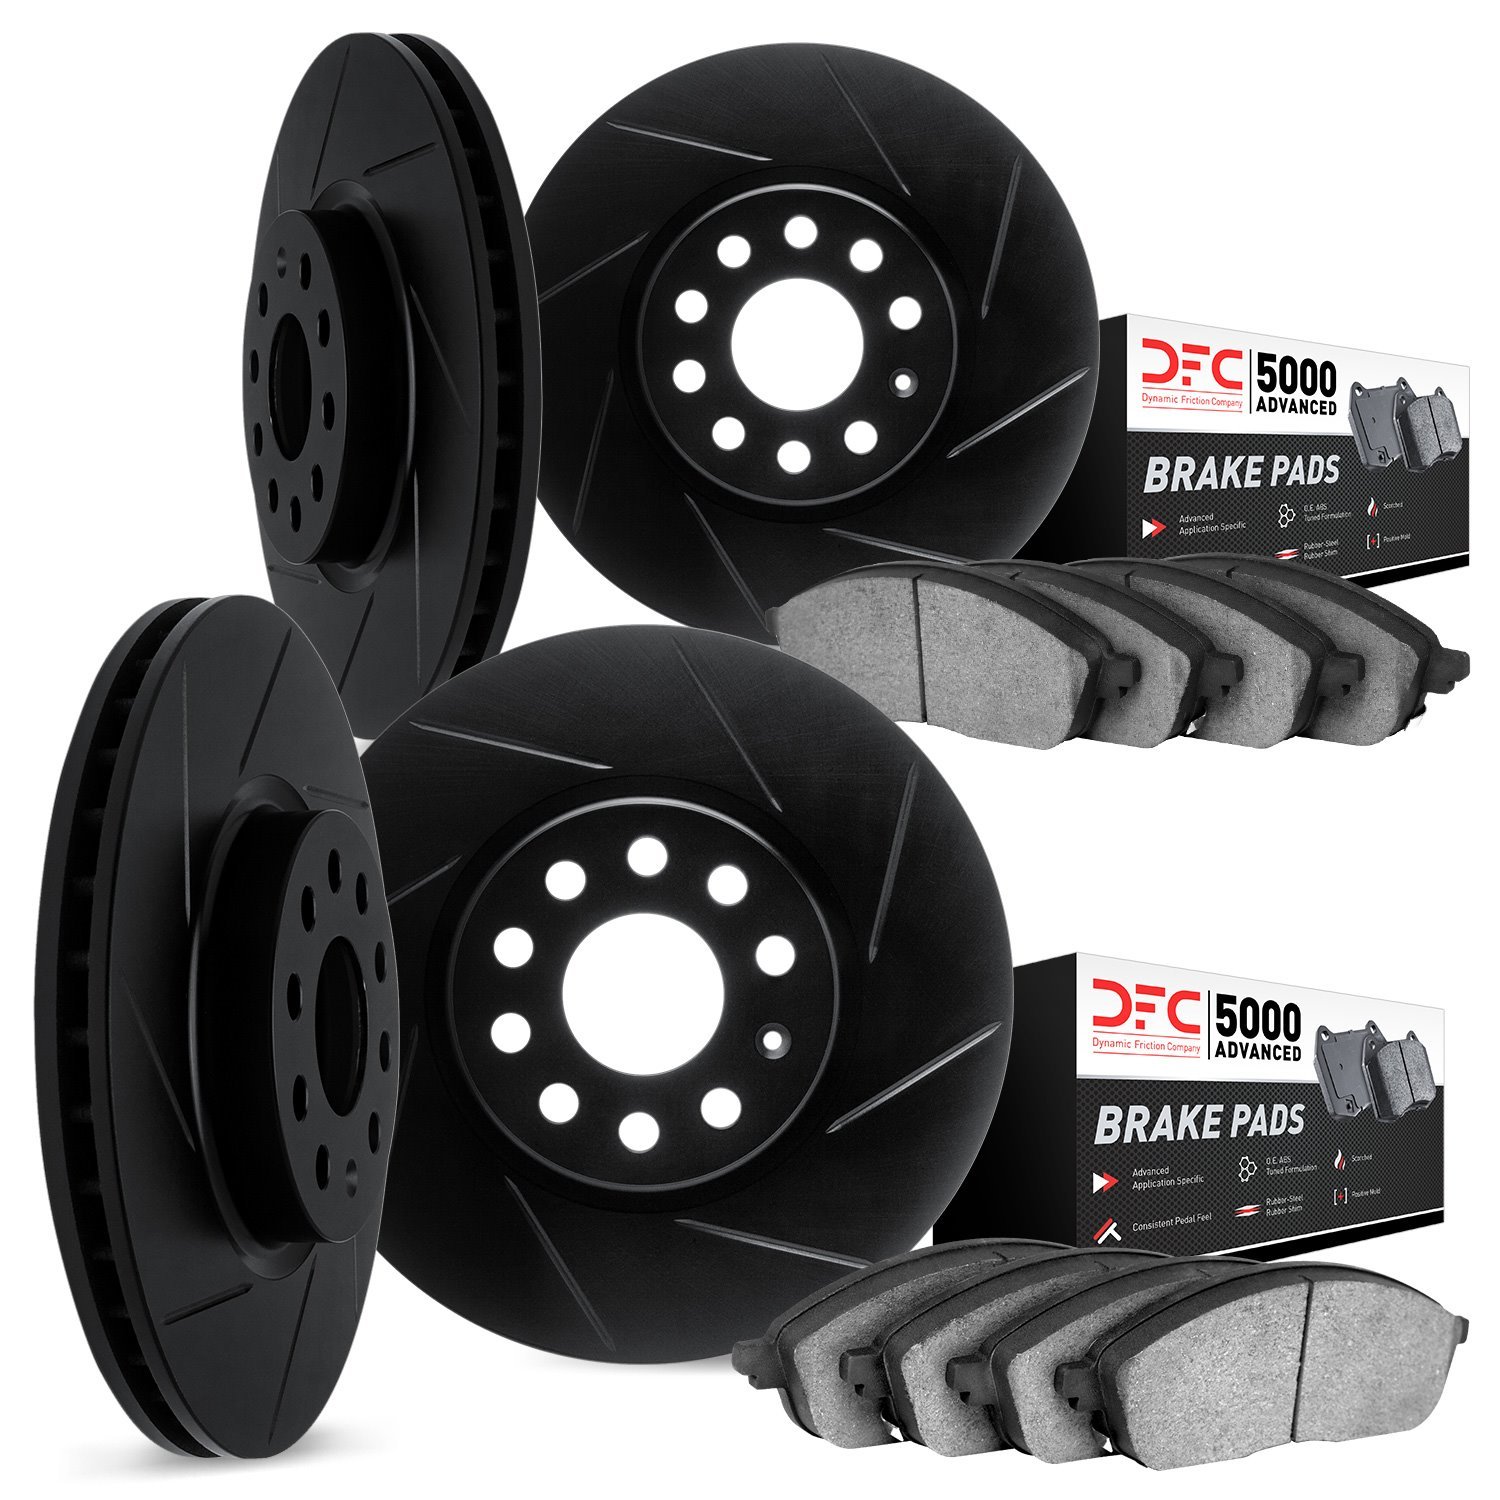 3514-31052 Slotted Brake Rotors w/5000 Advanced Brake Pads Kit & Hardware [Black], 2007-2015 BMW, Position: Front and Rear